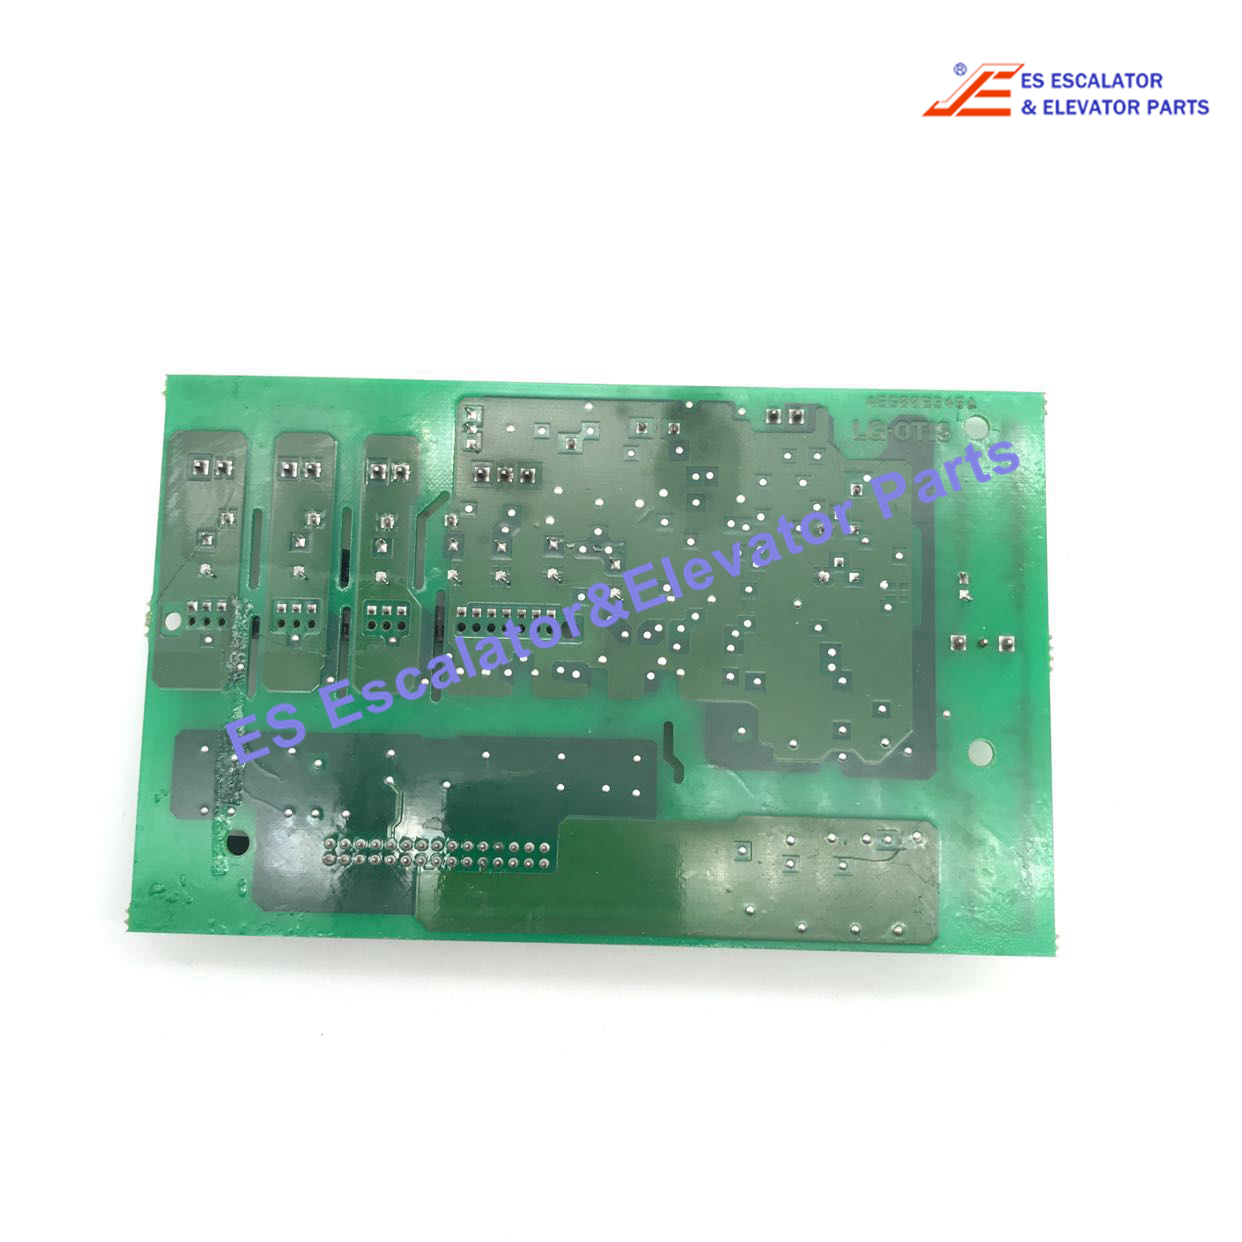 DPP-131 Elevator PCB Board With Stack Use For OTIS